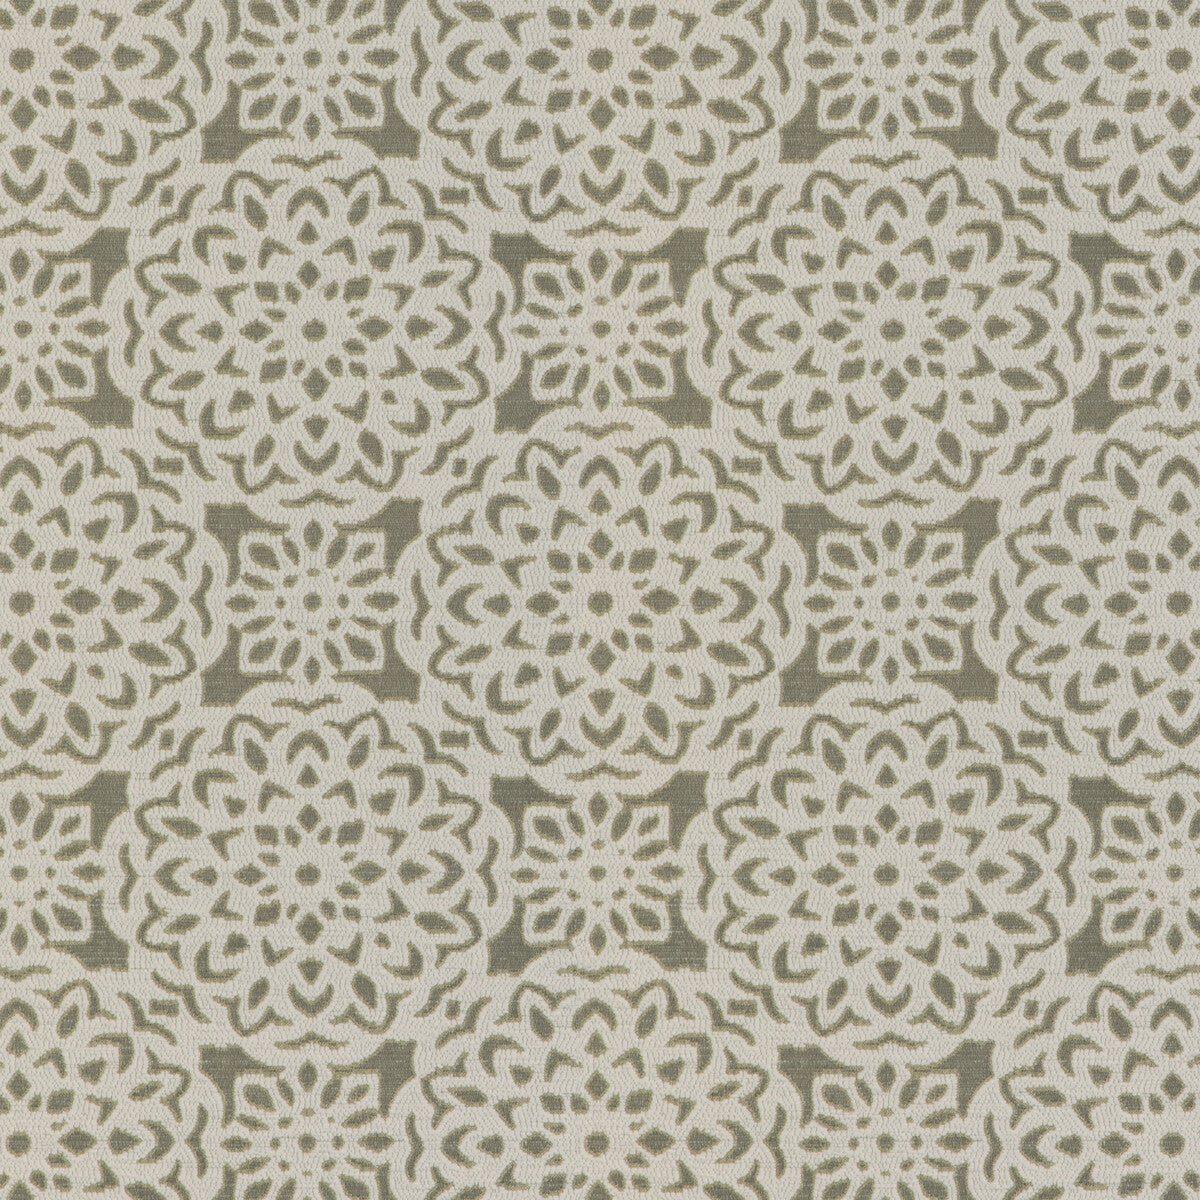 Garden Wall fabric in sand dollar color - pattern 37069.161.0 - by Kravet Contract in the Chesapeake collection